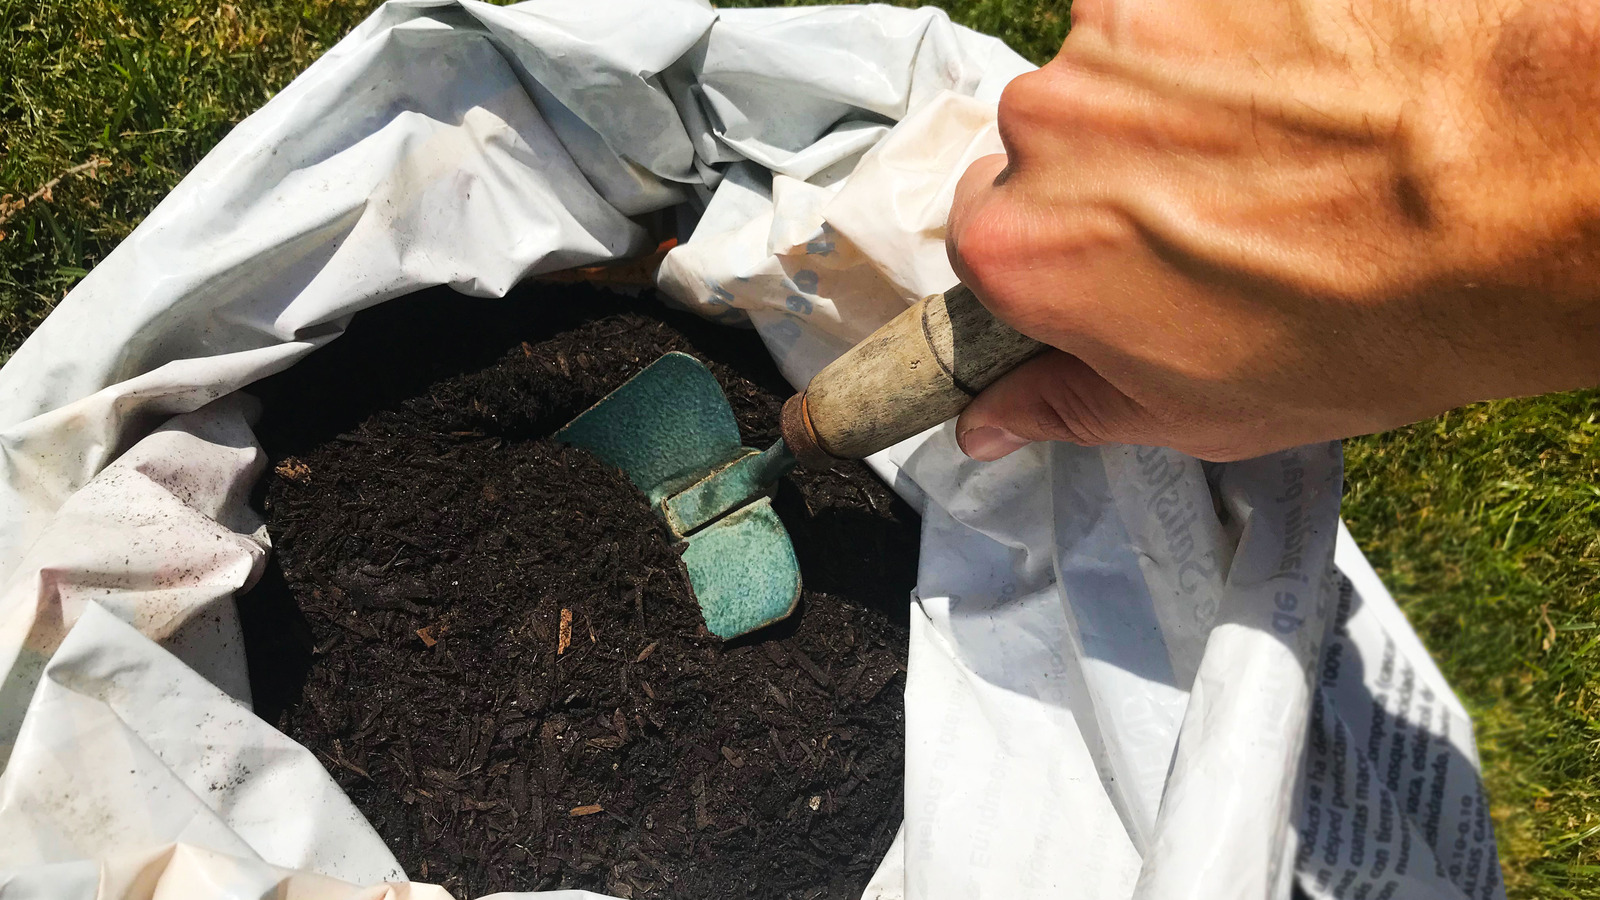 https://www.housedigest.com/img/gallery/save-your-empty-potting-soil-bags-to-expand-your-small-garden/l-intro-1697654433.jpg